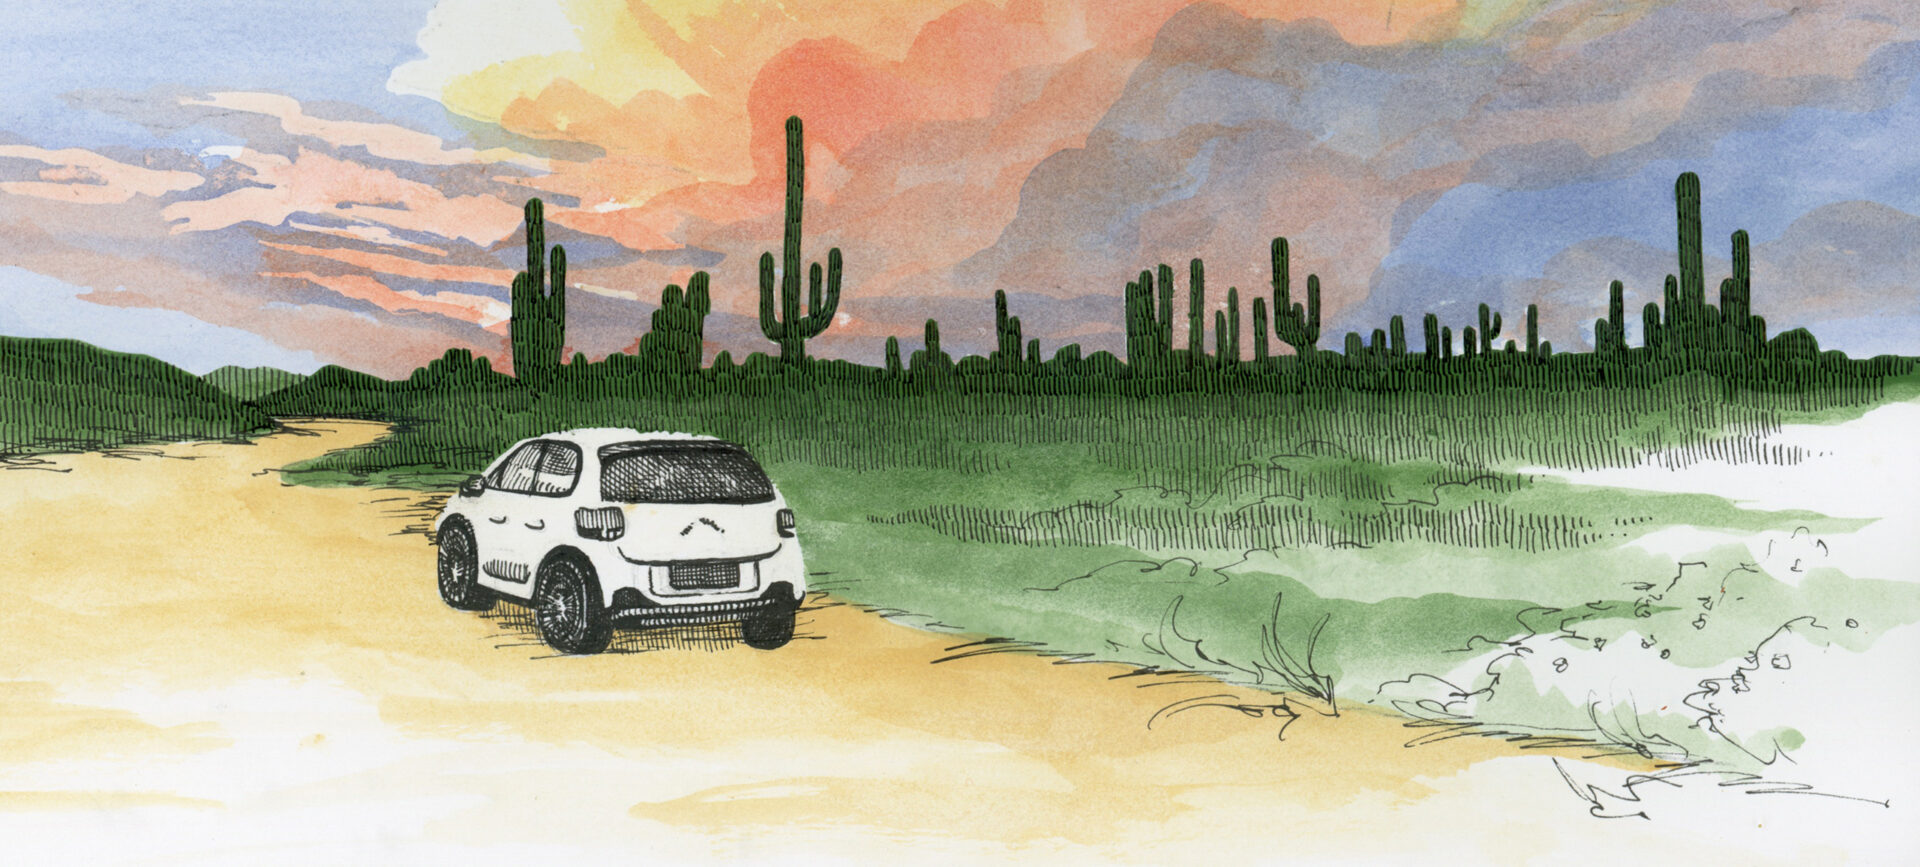 Color illustration of a desert scene with a car in the foreground and storm clouds on the horizon